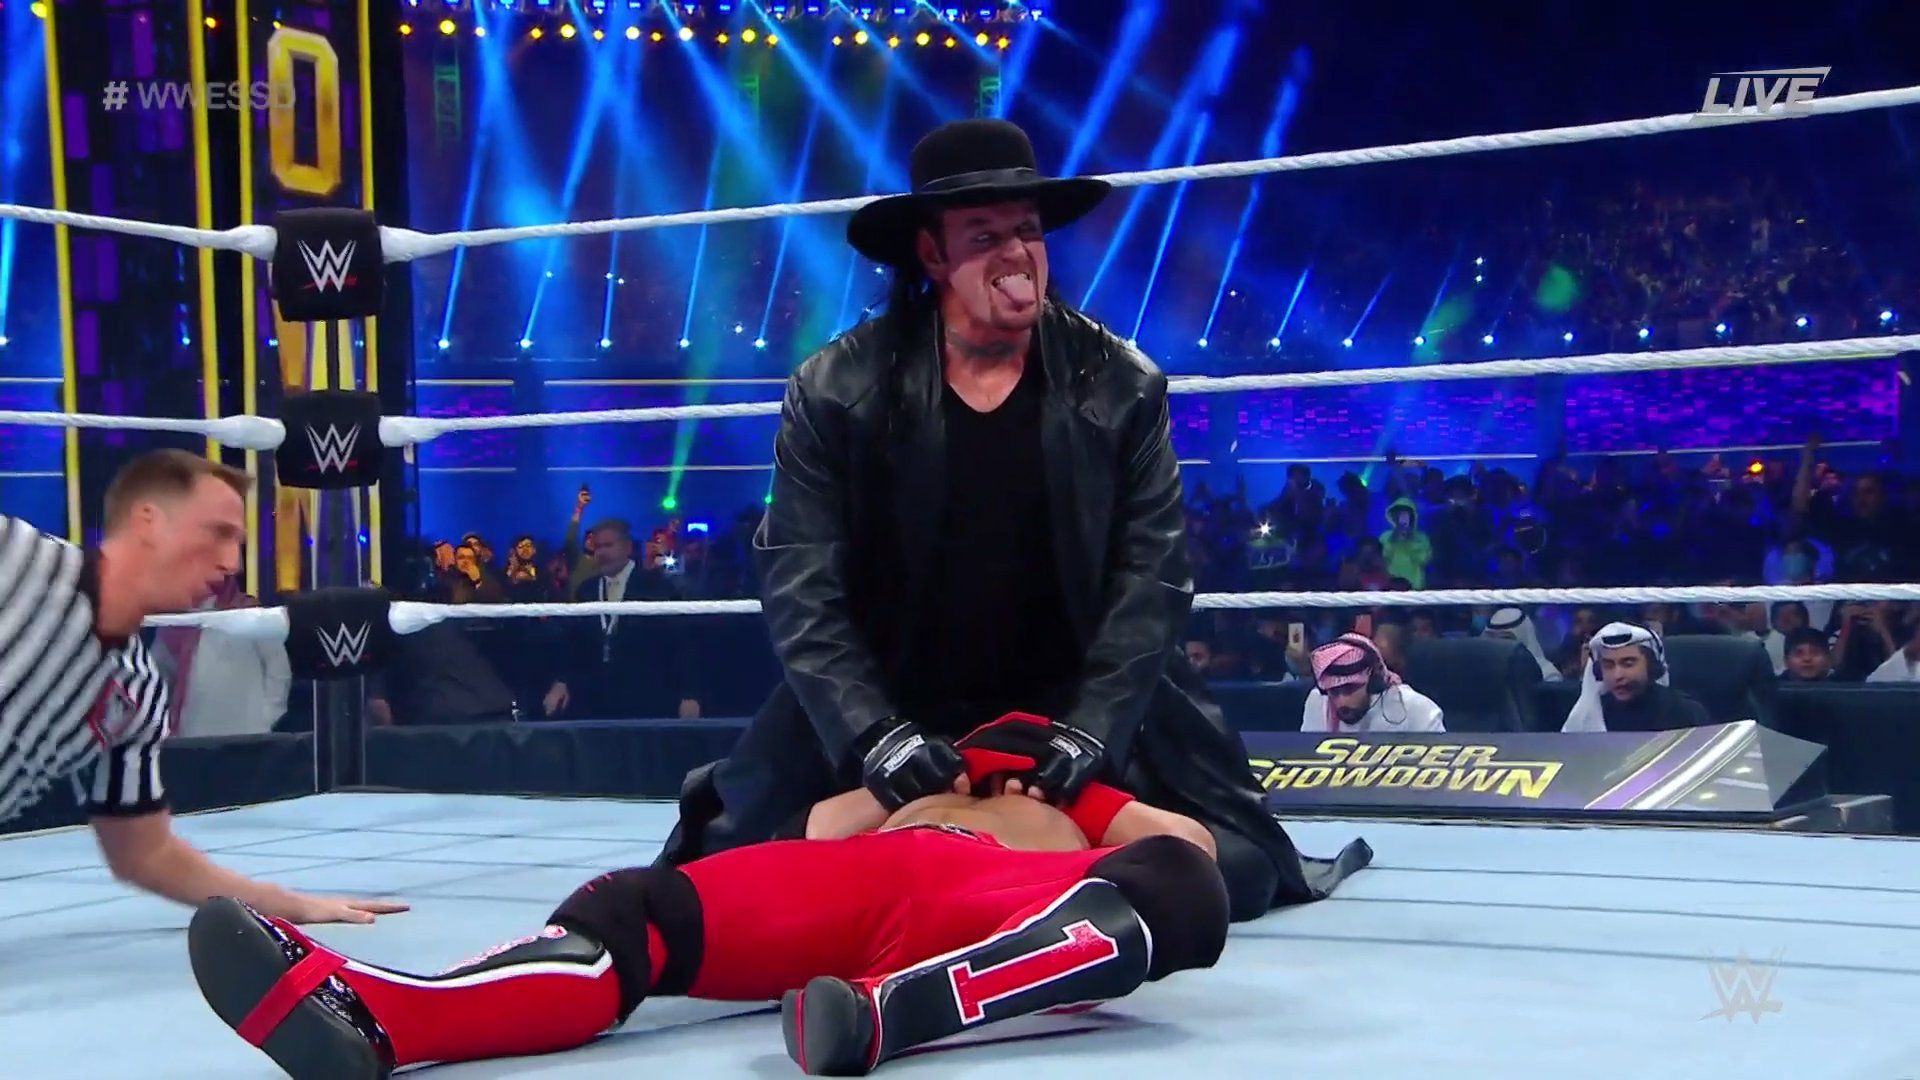 WWE legend The Undertaker returns to beat AJ Styles at Super